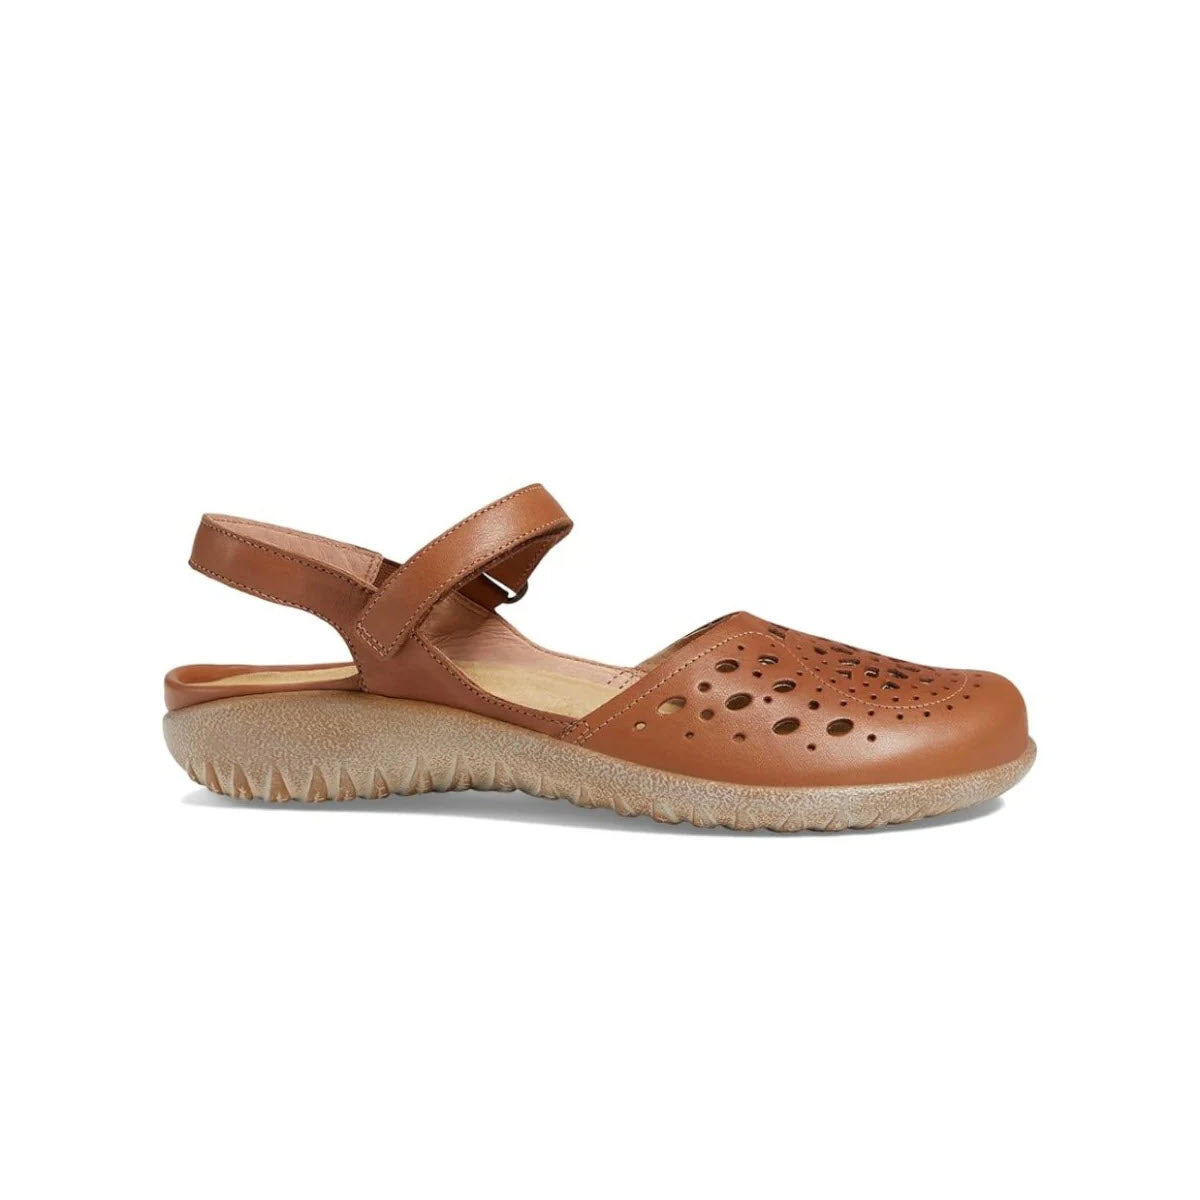 A single caramel leather Naot Arataki mary jane style shoe with an adjustable strap and decorative perforations, isolated on a white background.